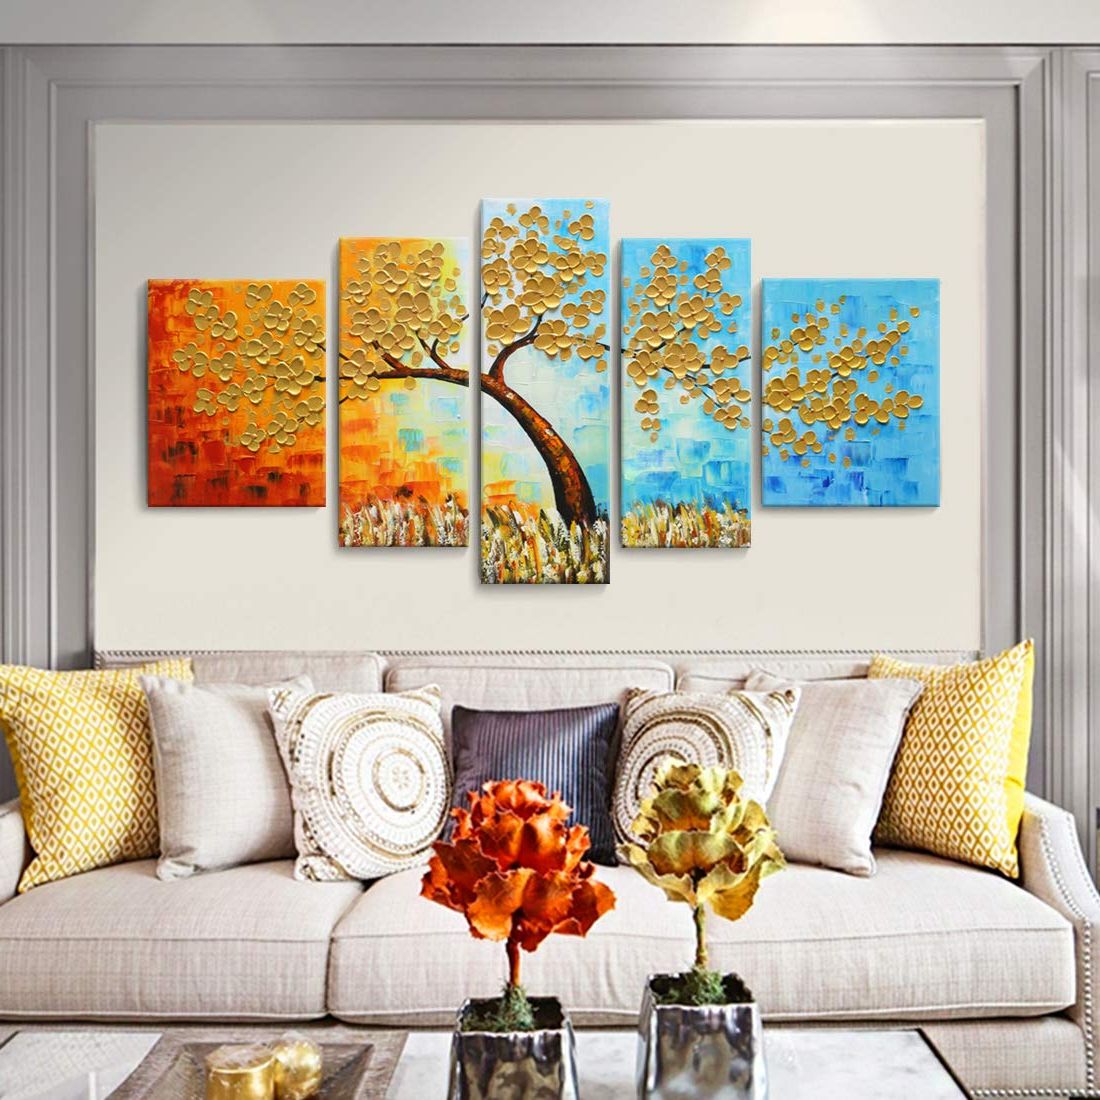 [%amazon: Extra Large Wall Art 100% Hand Painted Oil Painting On Canvas  3d Colorful Tree Artwork Palette Knife Impasto Texture 5 Pieces Abstract  Golden Paintings For Living Room Bedroom Office Décor: Posters & Throughout Most Current Oil Painting Wall Art|oil Painting Wall Art Inside Latest Amazon: Extra Large Wall Art 100% Hand Painted Oil Painting On Canvas  3d Colorful Tree Artwork Palette Knife Impasto Texture 5 Pieces Abstract  Golden Paintings For Living Room Bedroom Office Décor: Posters &|popular Oil Painting Wall Art Pertaining To Amazon: Extra Large Wall Art 100% Hand Painted Oil Painting On Canvas  3d Colorful Tree Artwork Palette Knife Impasto Texture 5 Pieces Abstract  Golden Paintings For Living Room Bedroom Office Décor: Posters &|trendy Amazon: Extra Large Wall Art 100% Hand Painted Oil Painting On Canvas  3d Colorful Tree Artwork Palette Knife Impasto Texture 5 Pieces Abstract  Golden Paintings For Living Room Bedroom Office Décor: Posters & Regarding Oil Painting Wall Art%] (View 11 of 15)